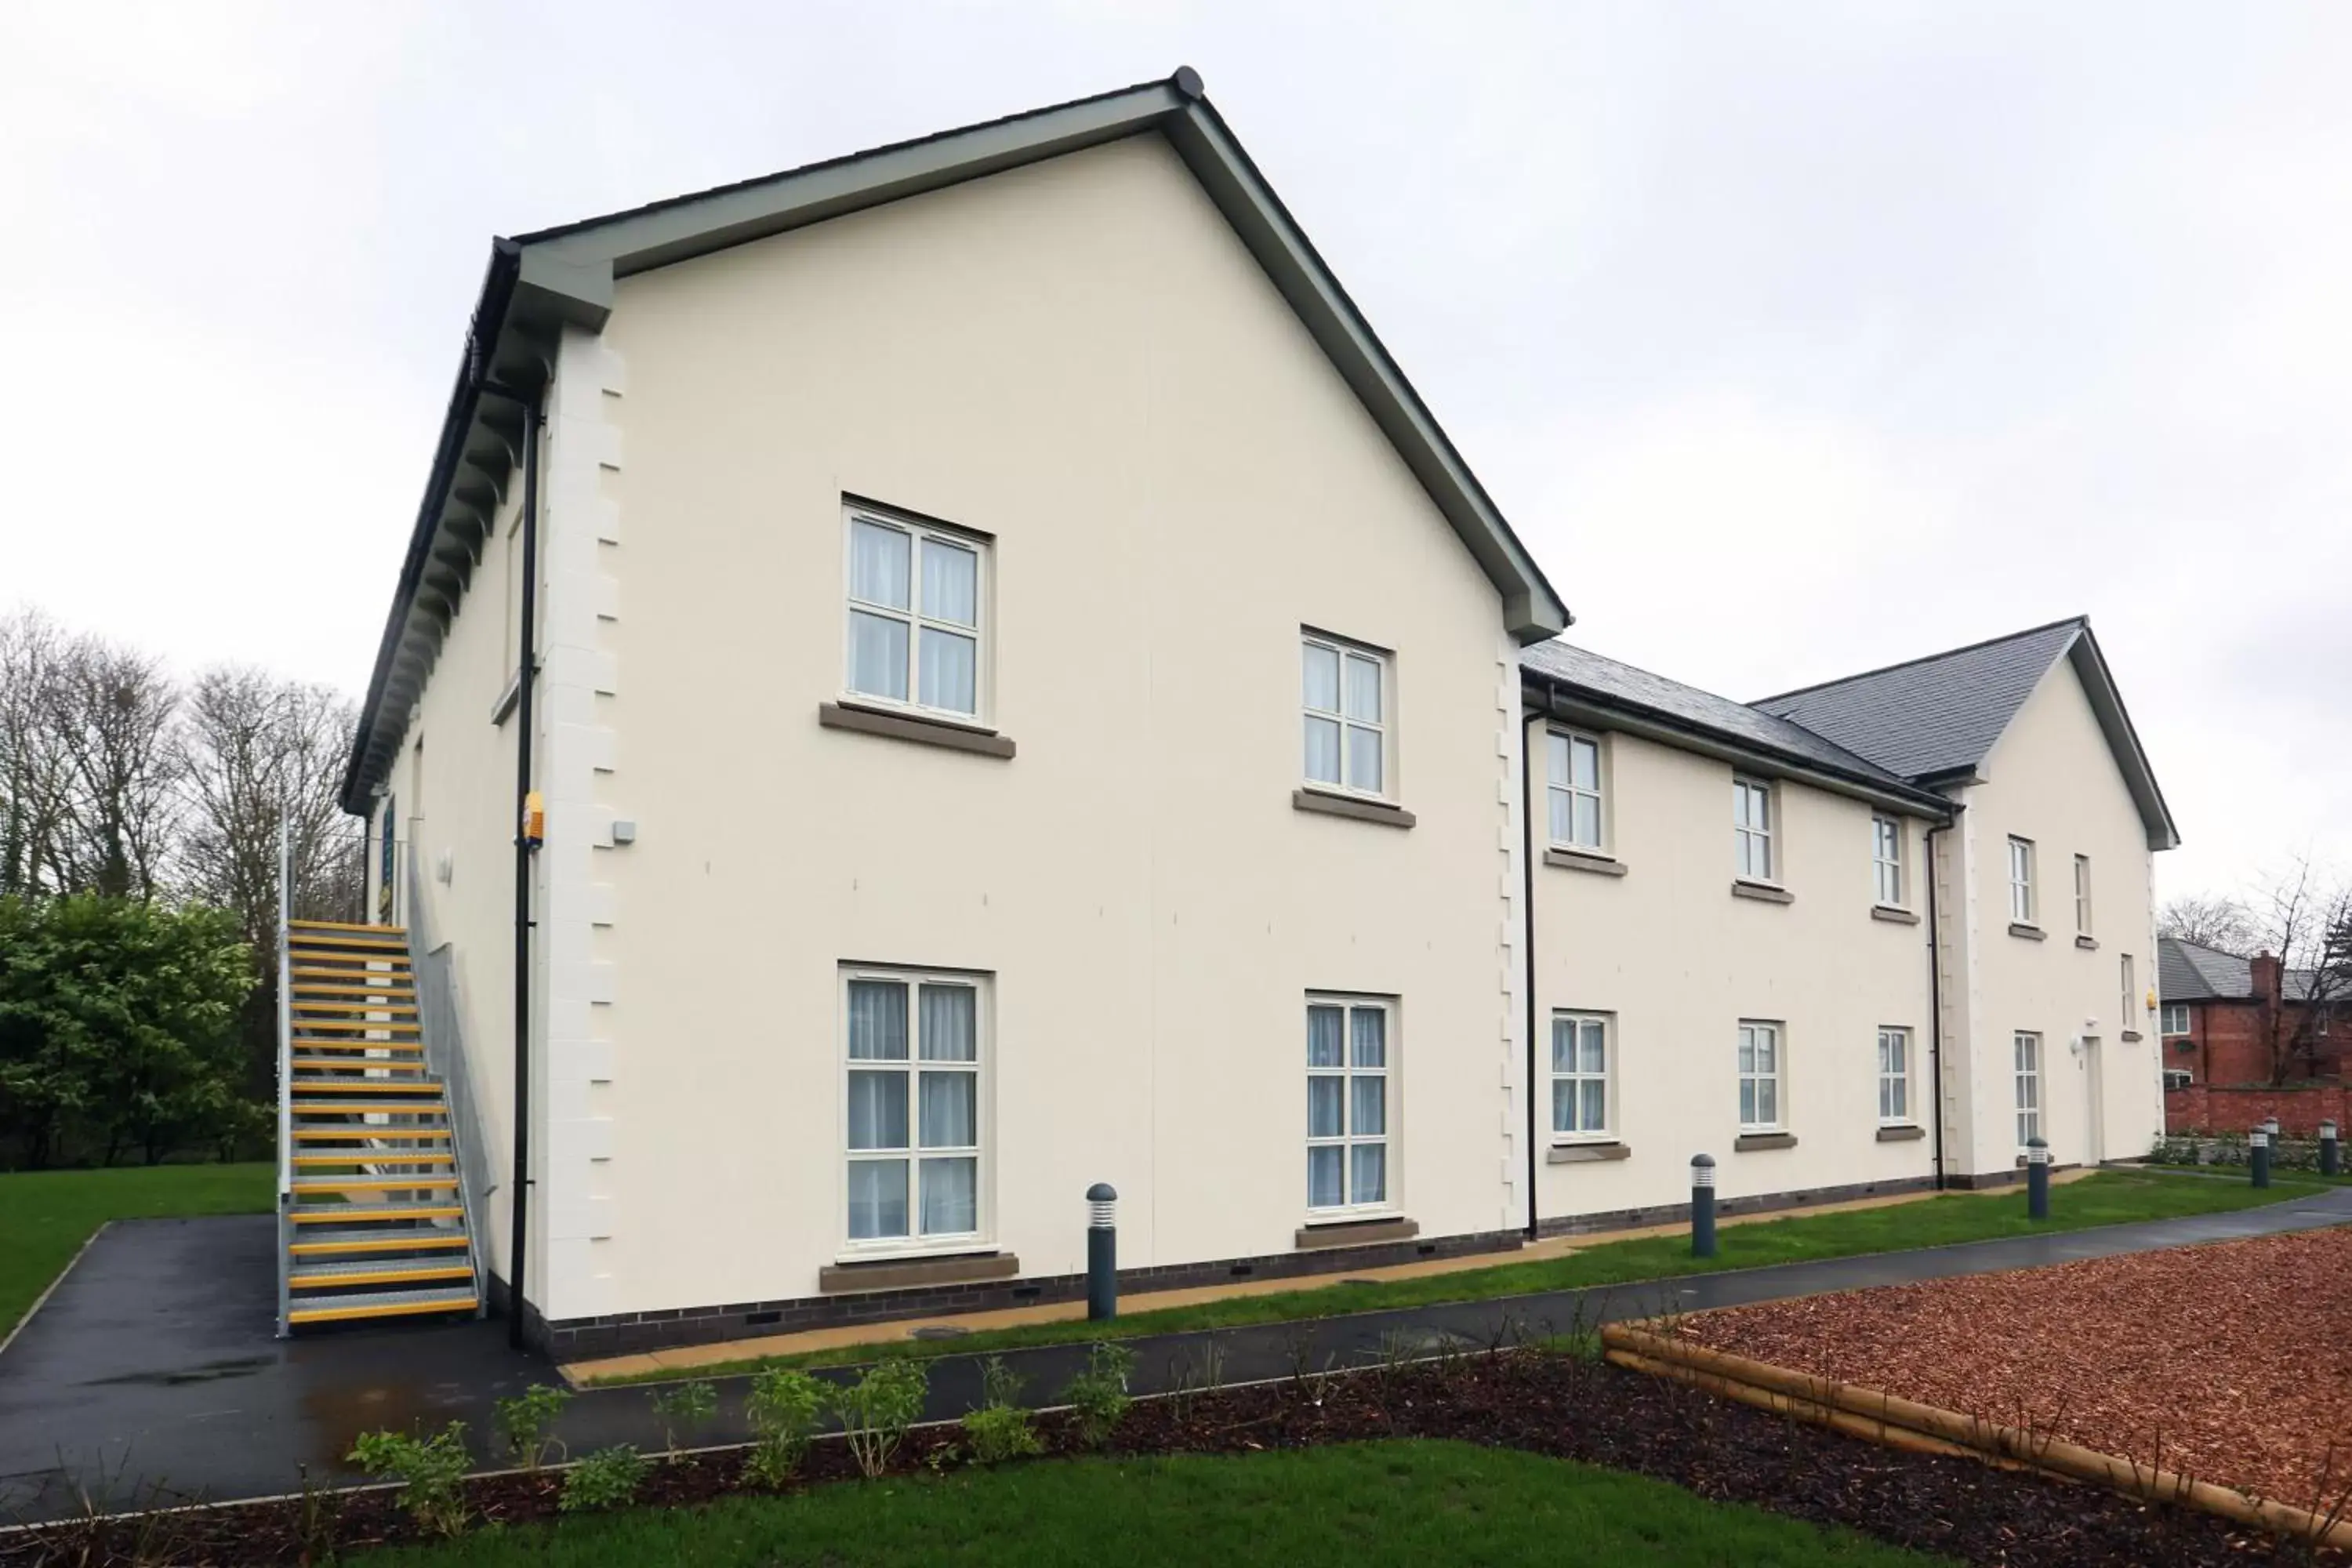 Property Building in Talardy, St Asaph by Marston’s Inns